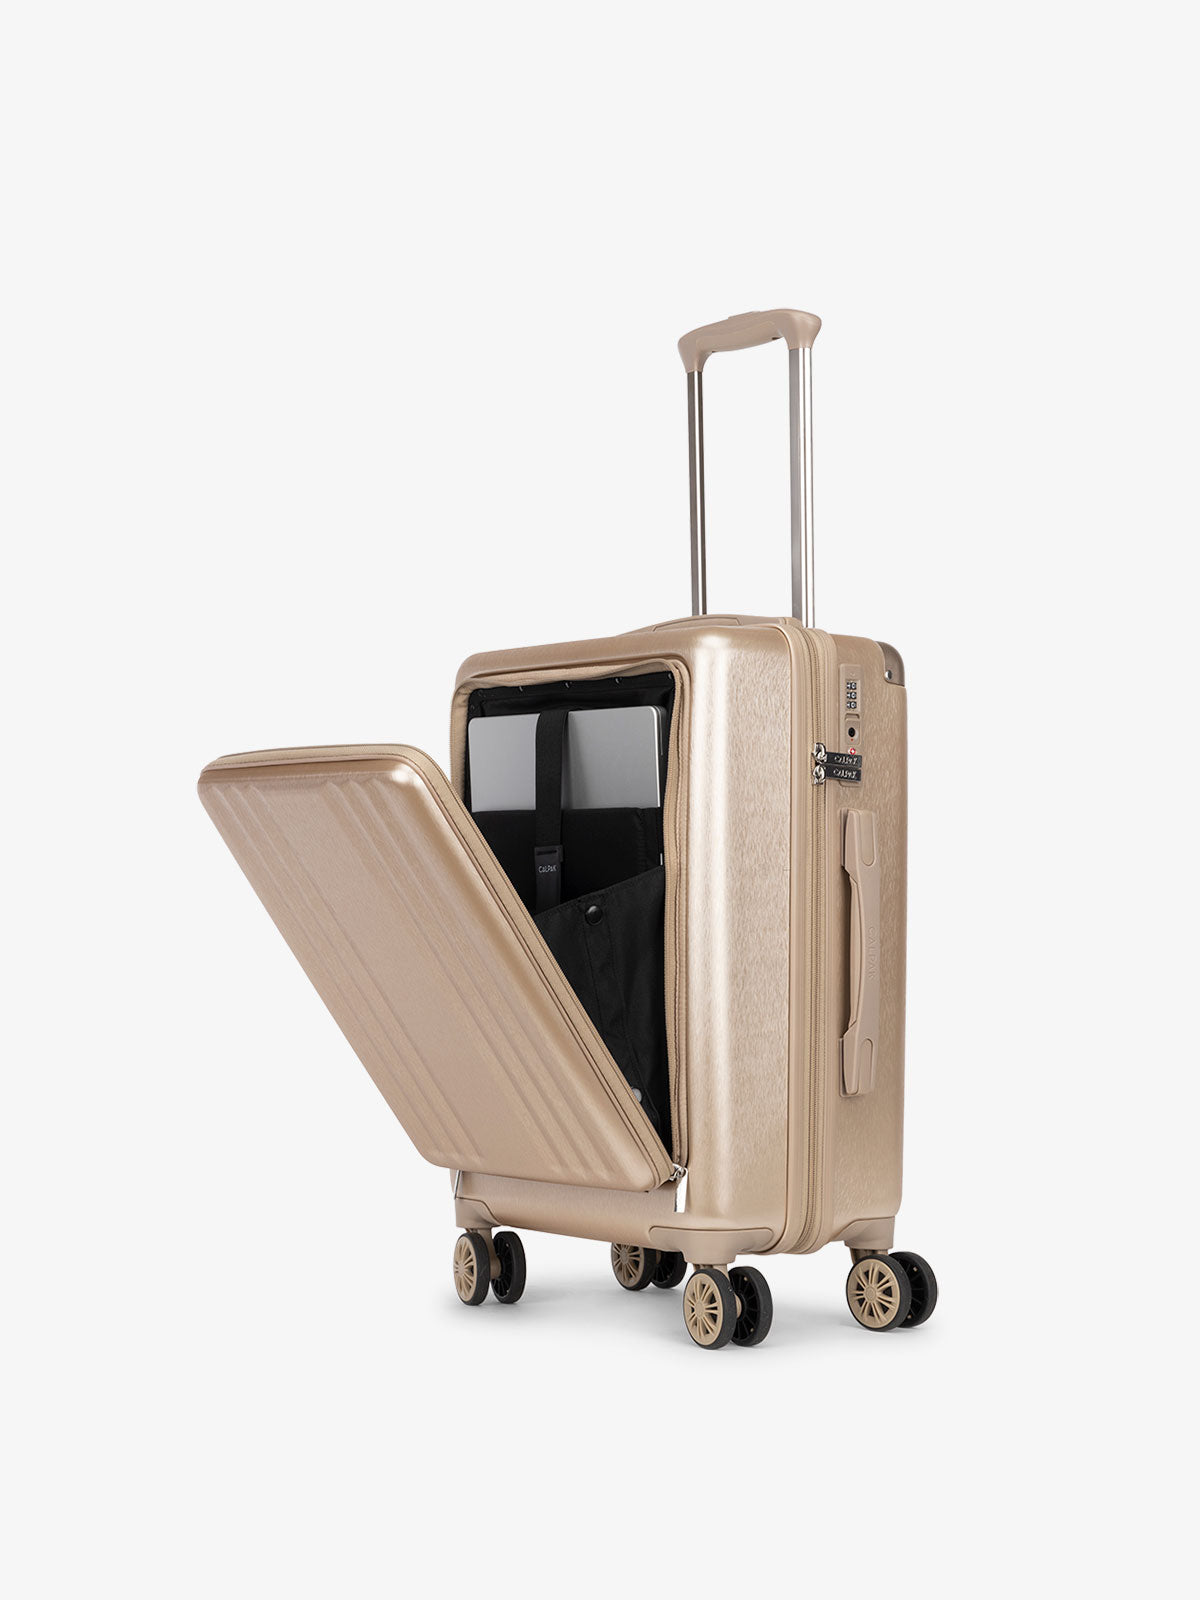 CALPAK Ambeur front pocket lightweight carry-on luggage in gold